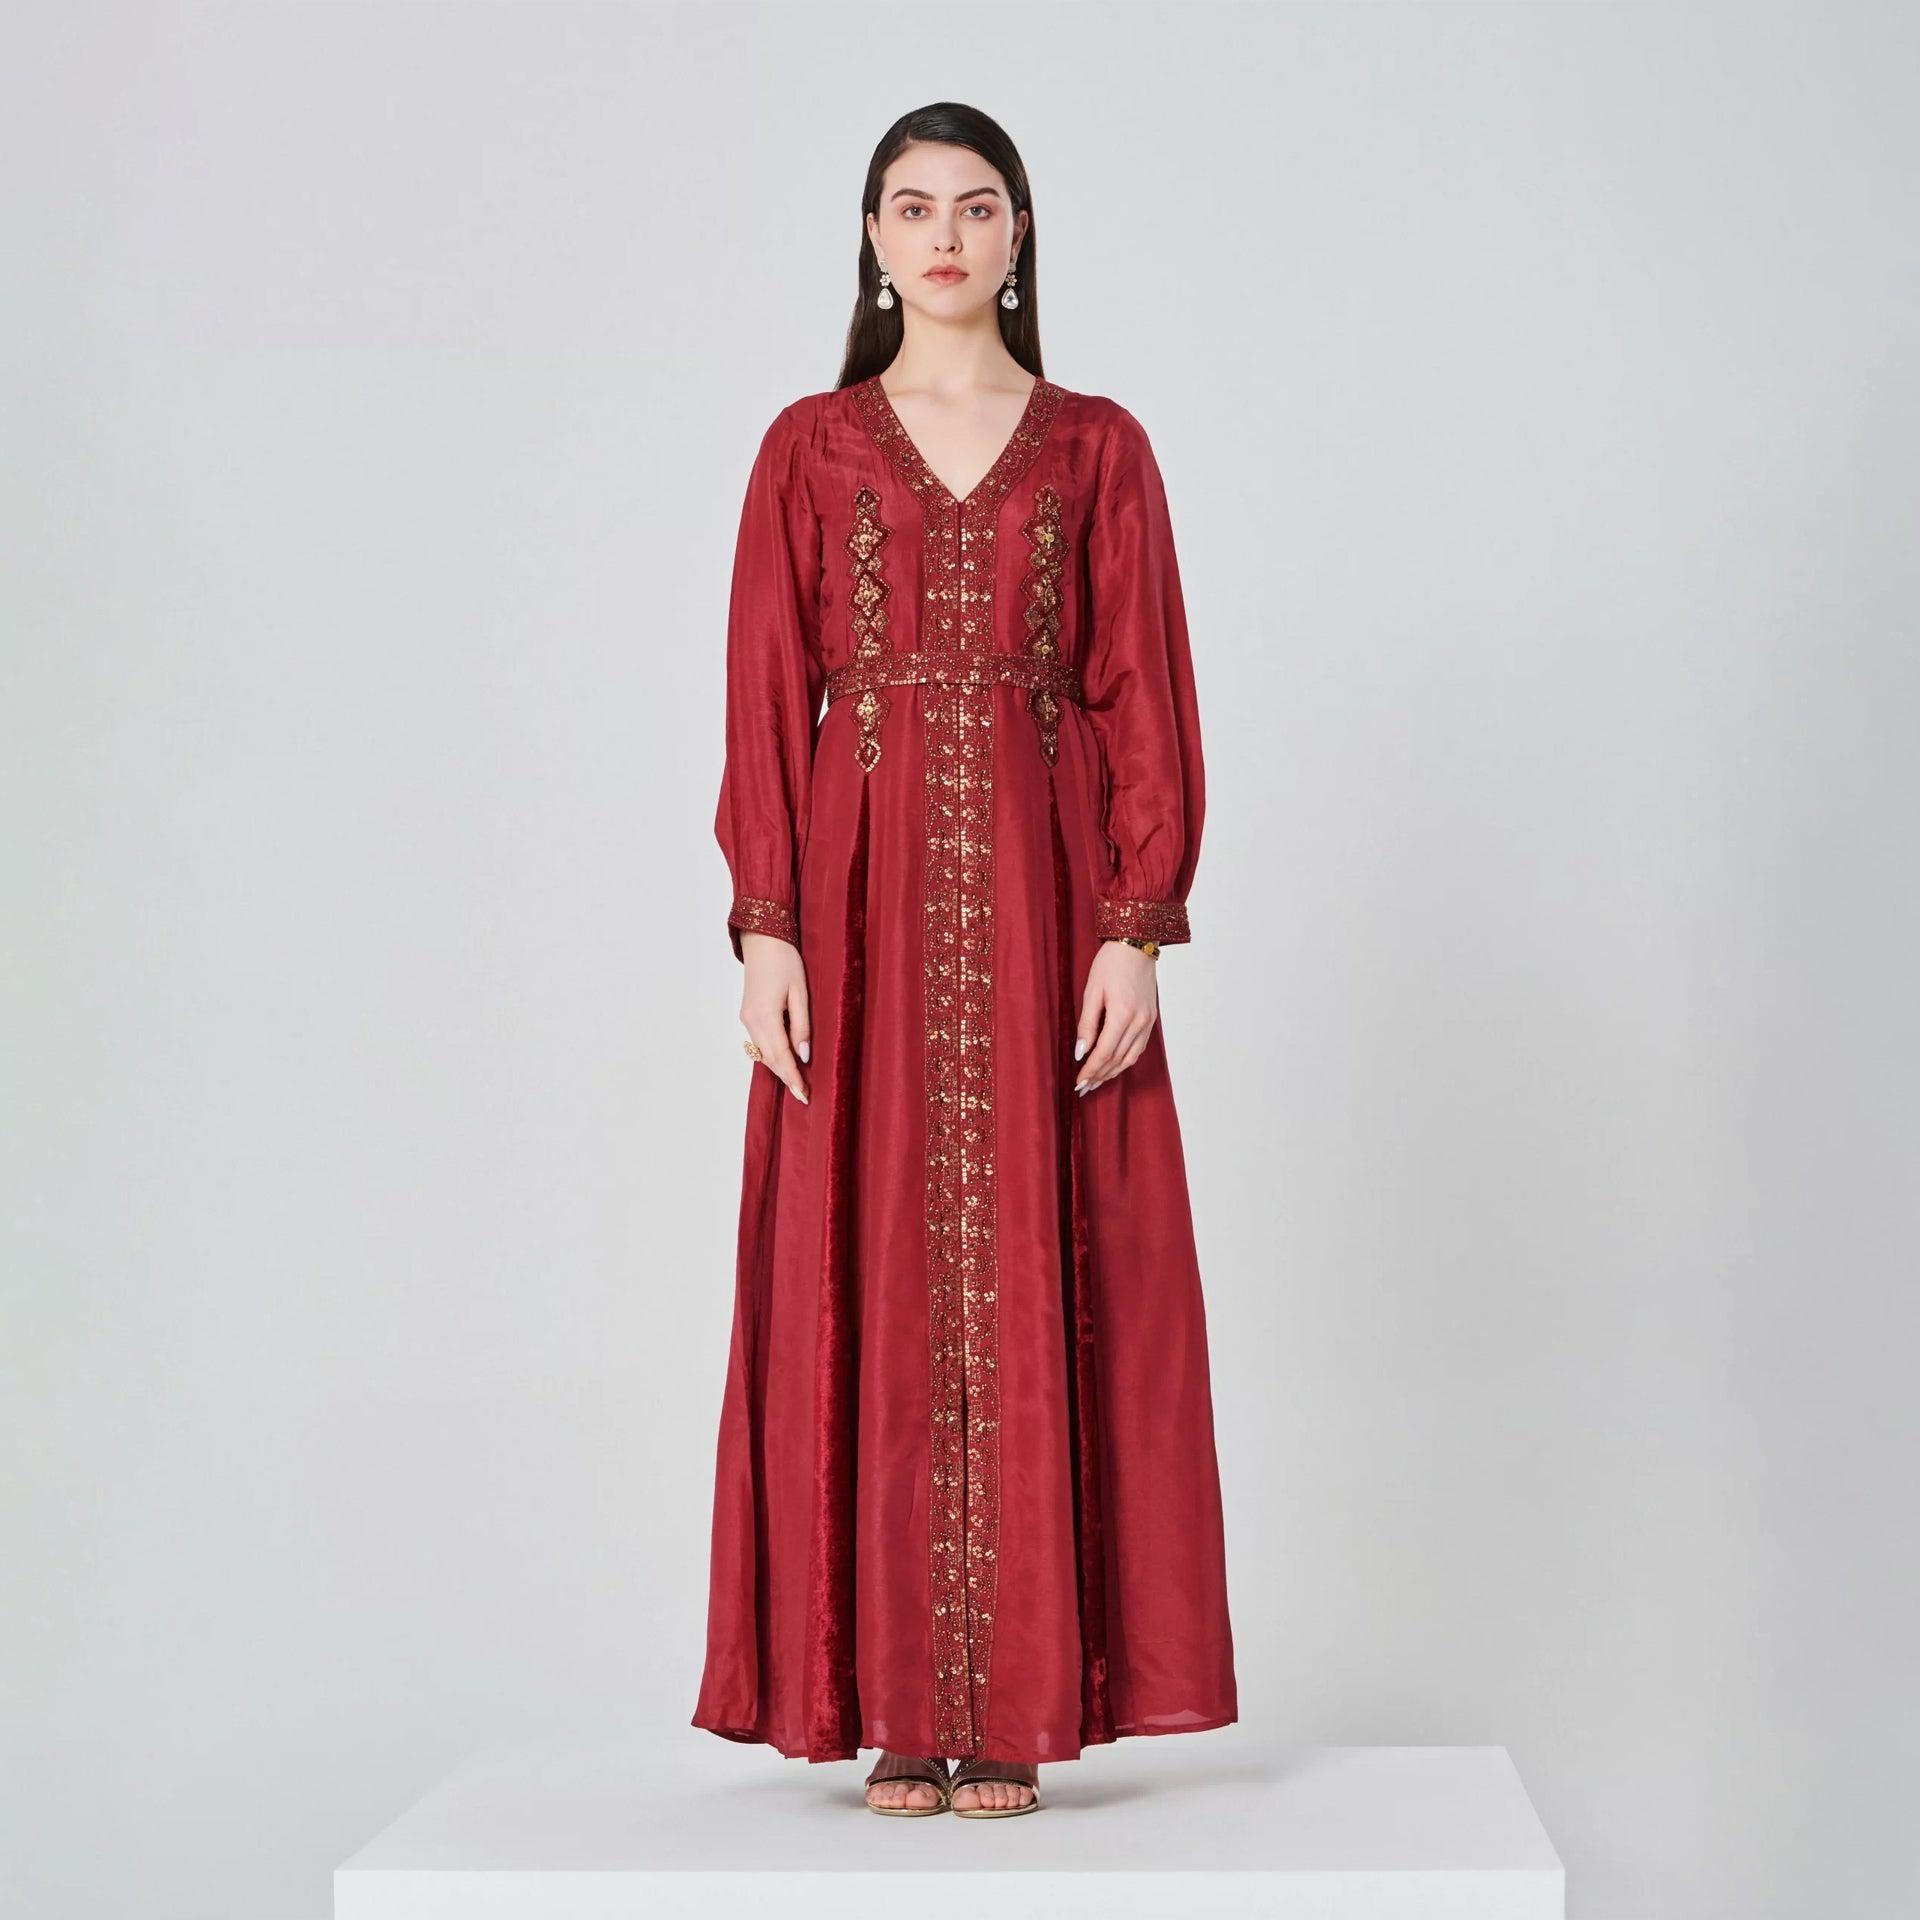 Burgundy Carmit Dress with Long Sleeves and Gold Embroidery From Shalky - WECRE8